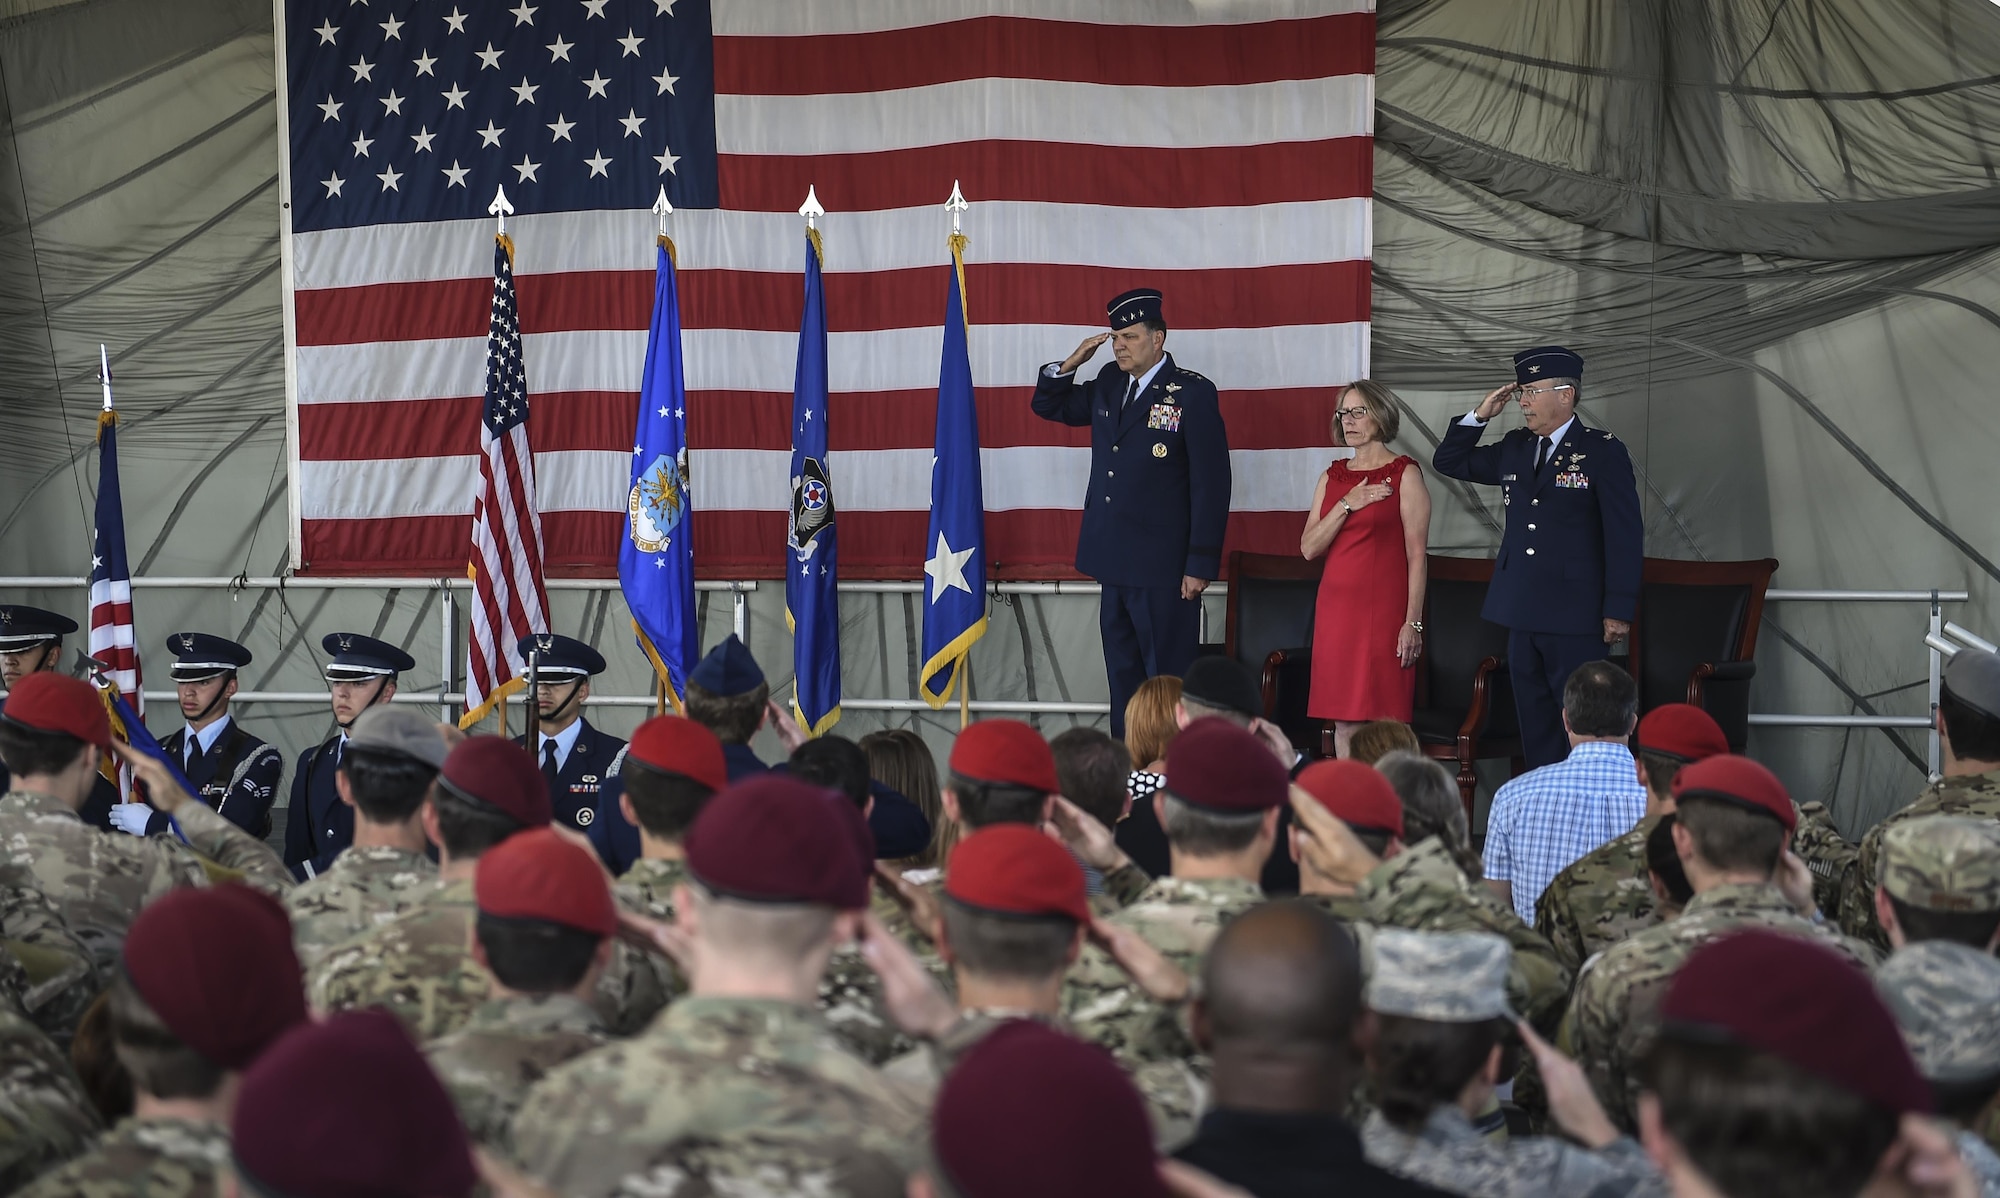 The family of Capt. Matthew D. Roland, a Special Tactics officer killed in action, was presented his posthumous Silver Star medal by Lt. Gen. Brad Heithold, commander of Air Force Special Operations Command, Hurlburt Field, Fla., June 1, 2016. Roland gave his last full measure to protect teammates during an ambush on his convoy at an Afghan-led security checkpoint near Camp Antonik, Afghanistan, Aug. 26, 2015. The Silver Star medal is the nation's third-highest valorous combat decoration.  (U.S. Air Force photo by Senior Airman Ryan Conroy/Released)